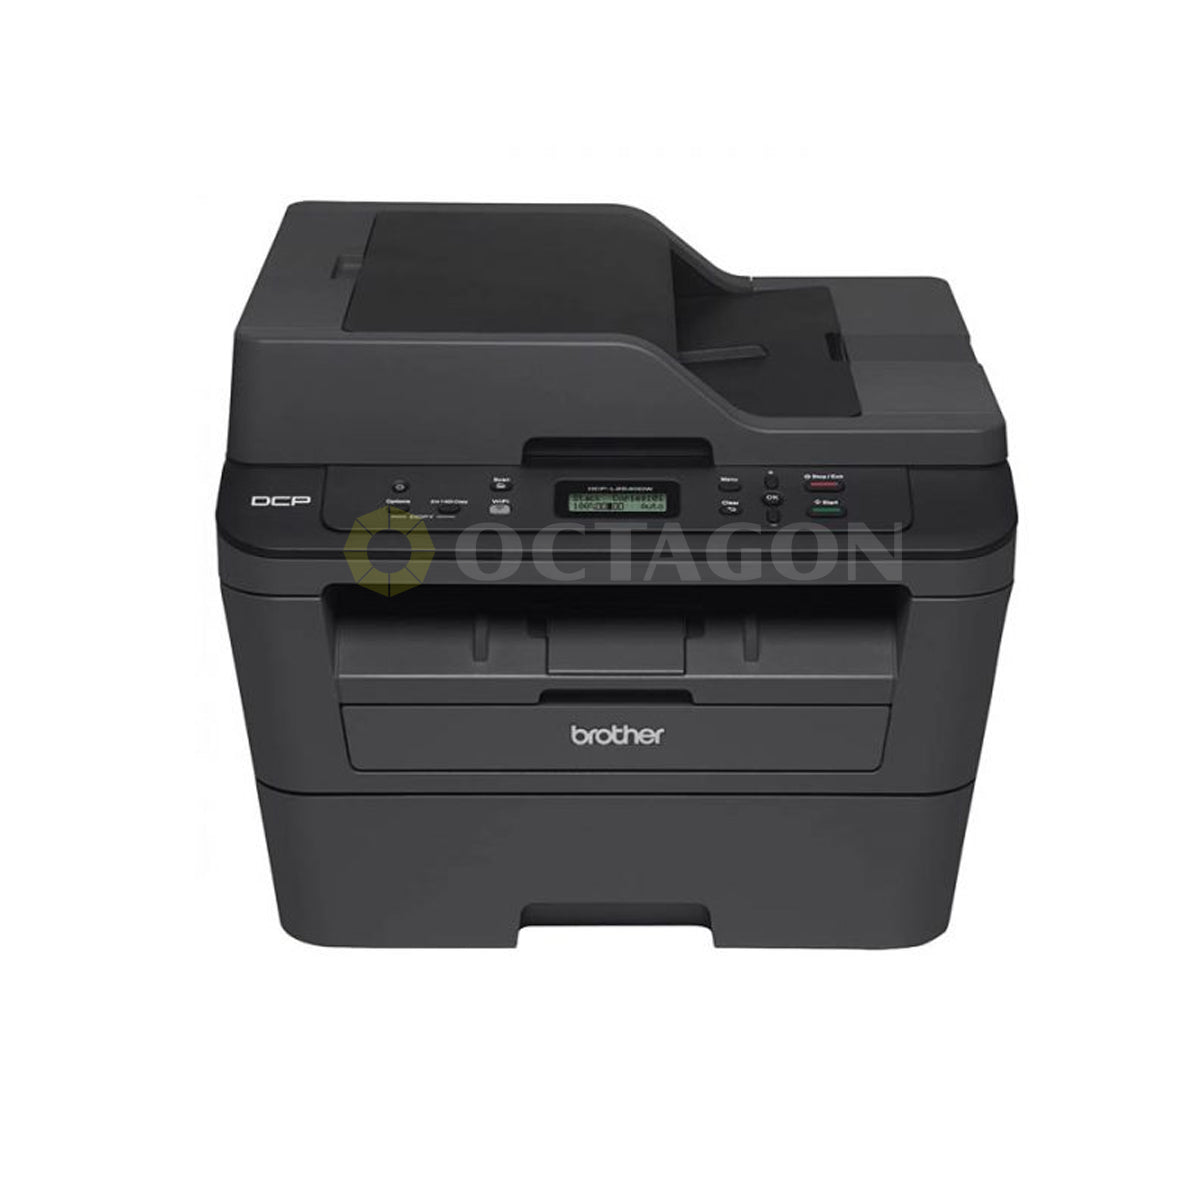 brother dcpl2540dw wireless laser printer for mac reviews